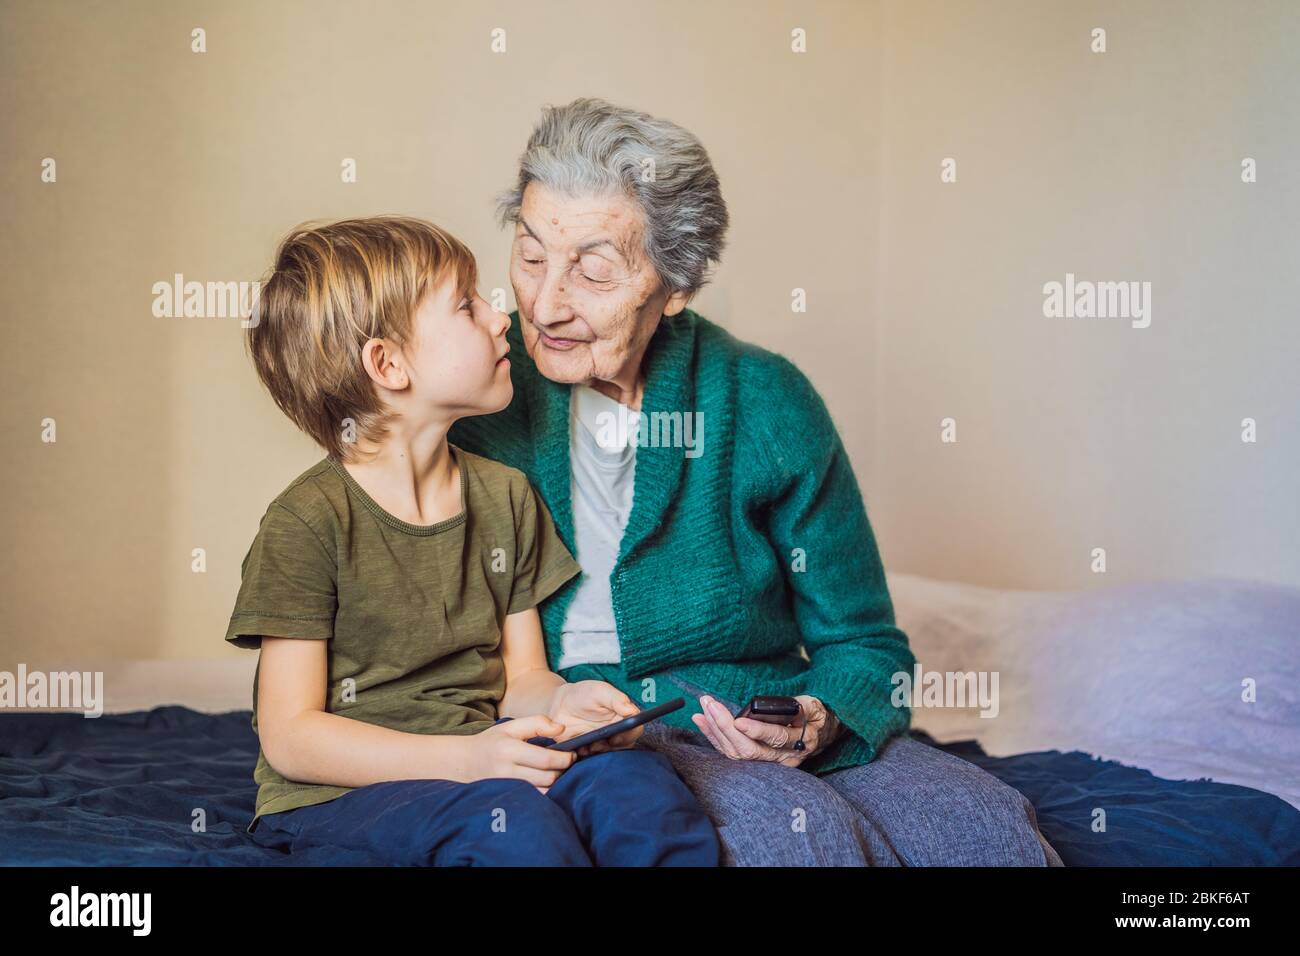 Coronavirus is over. Quarantine weakened. Take off the mask. Now you can meet with grandmother. Old woman and her grandson. Stock Photo